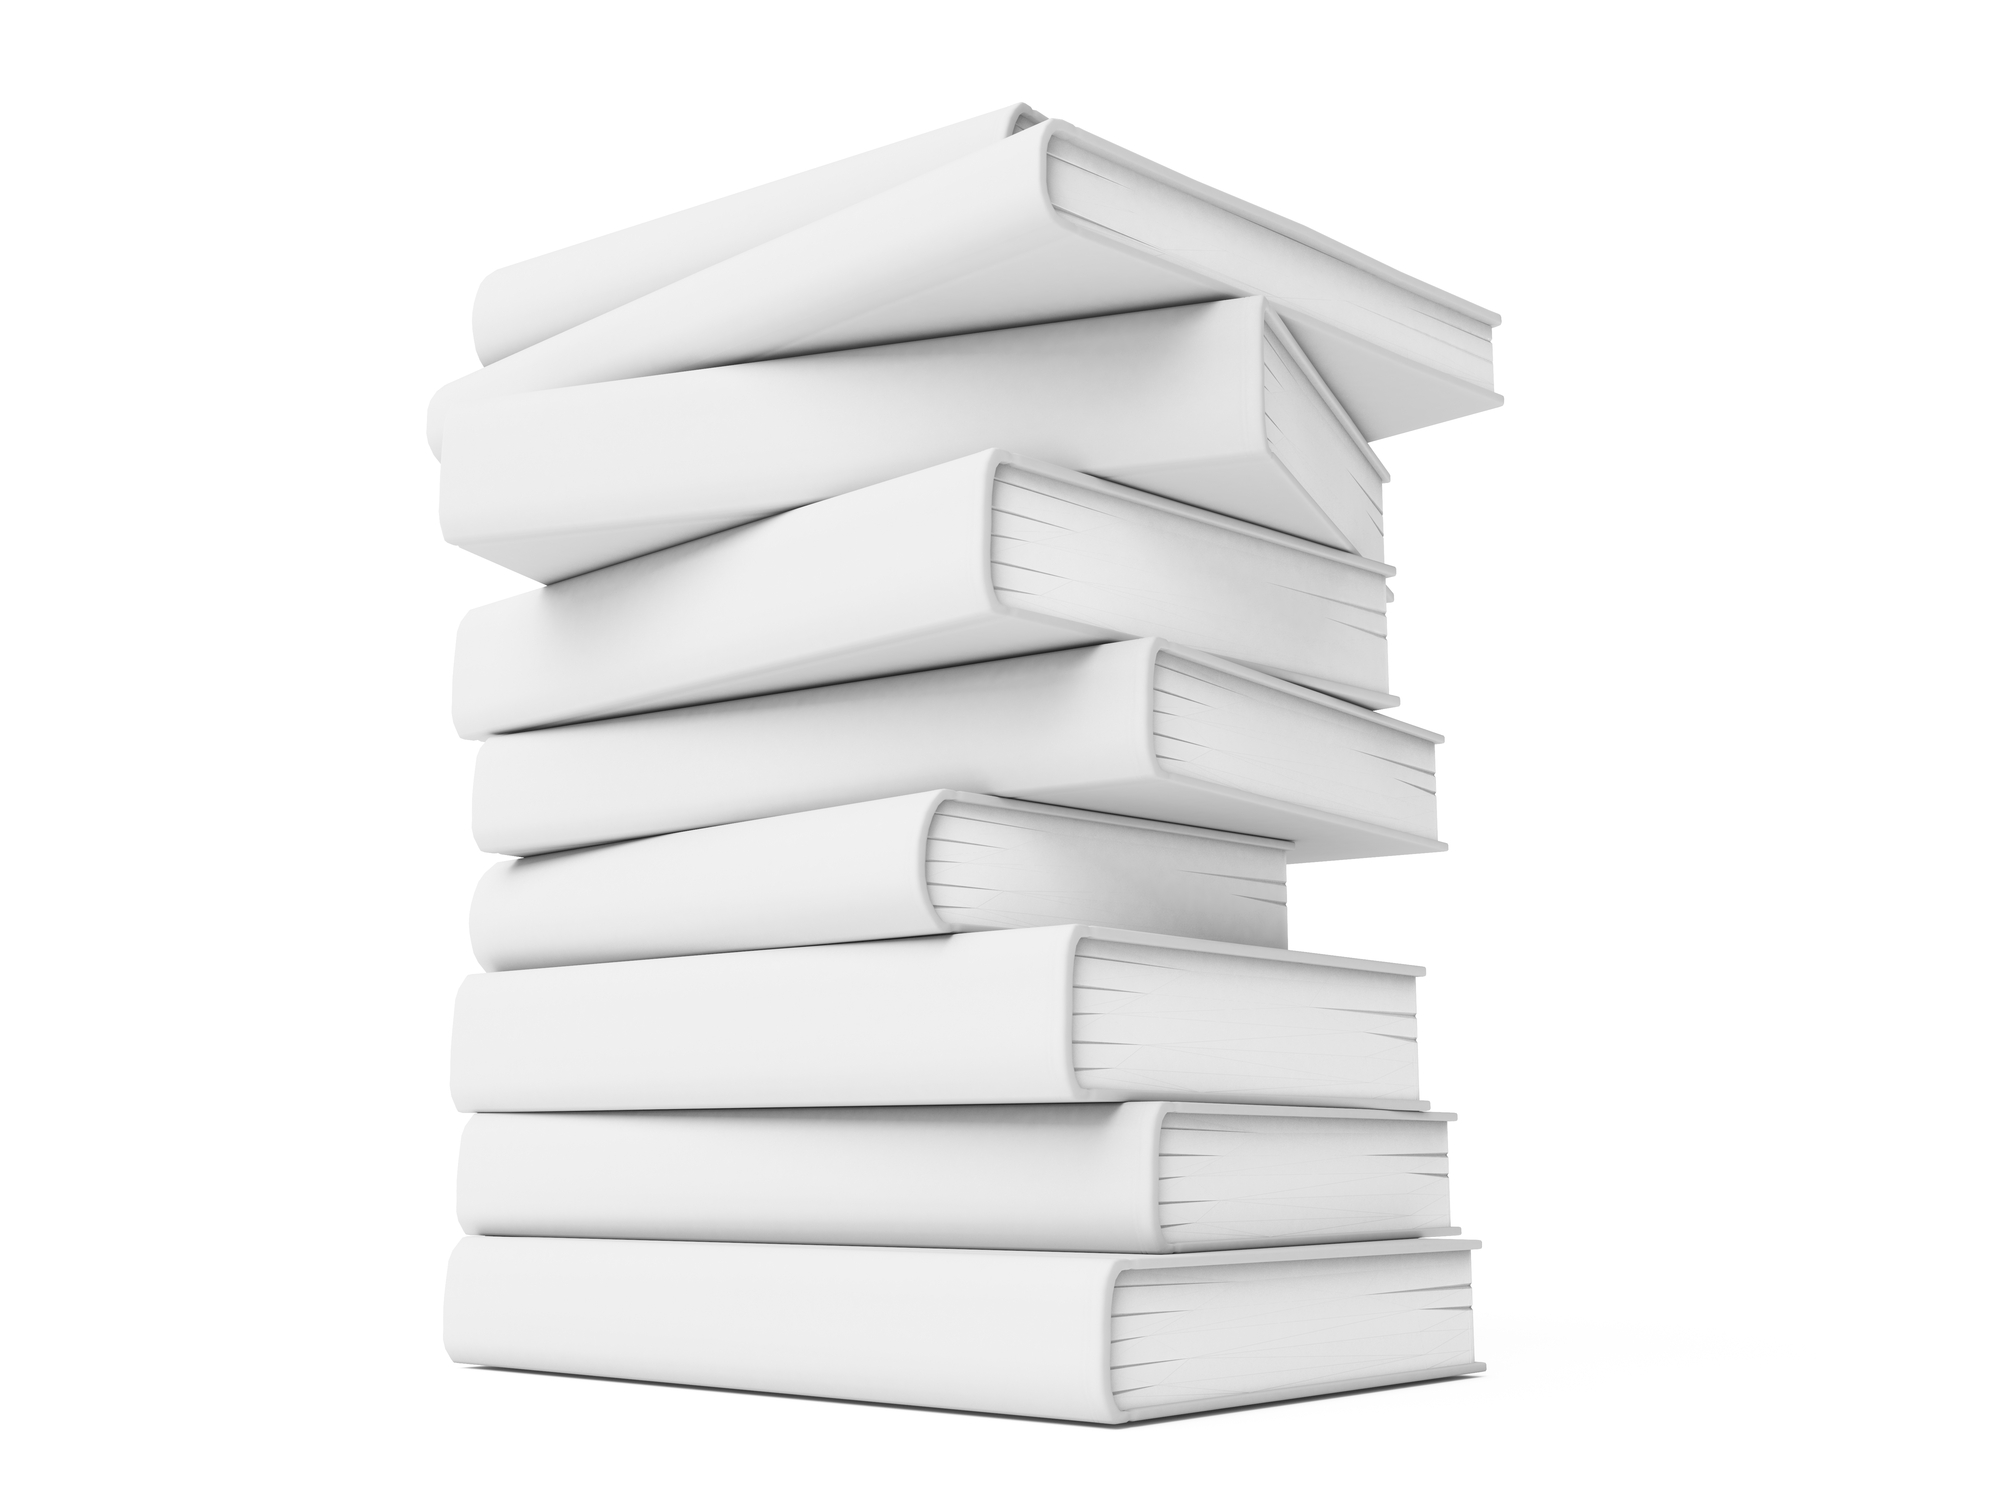 Blank book with white cover on white background. 3D rendering